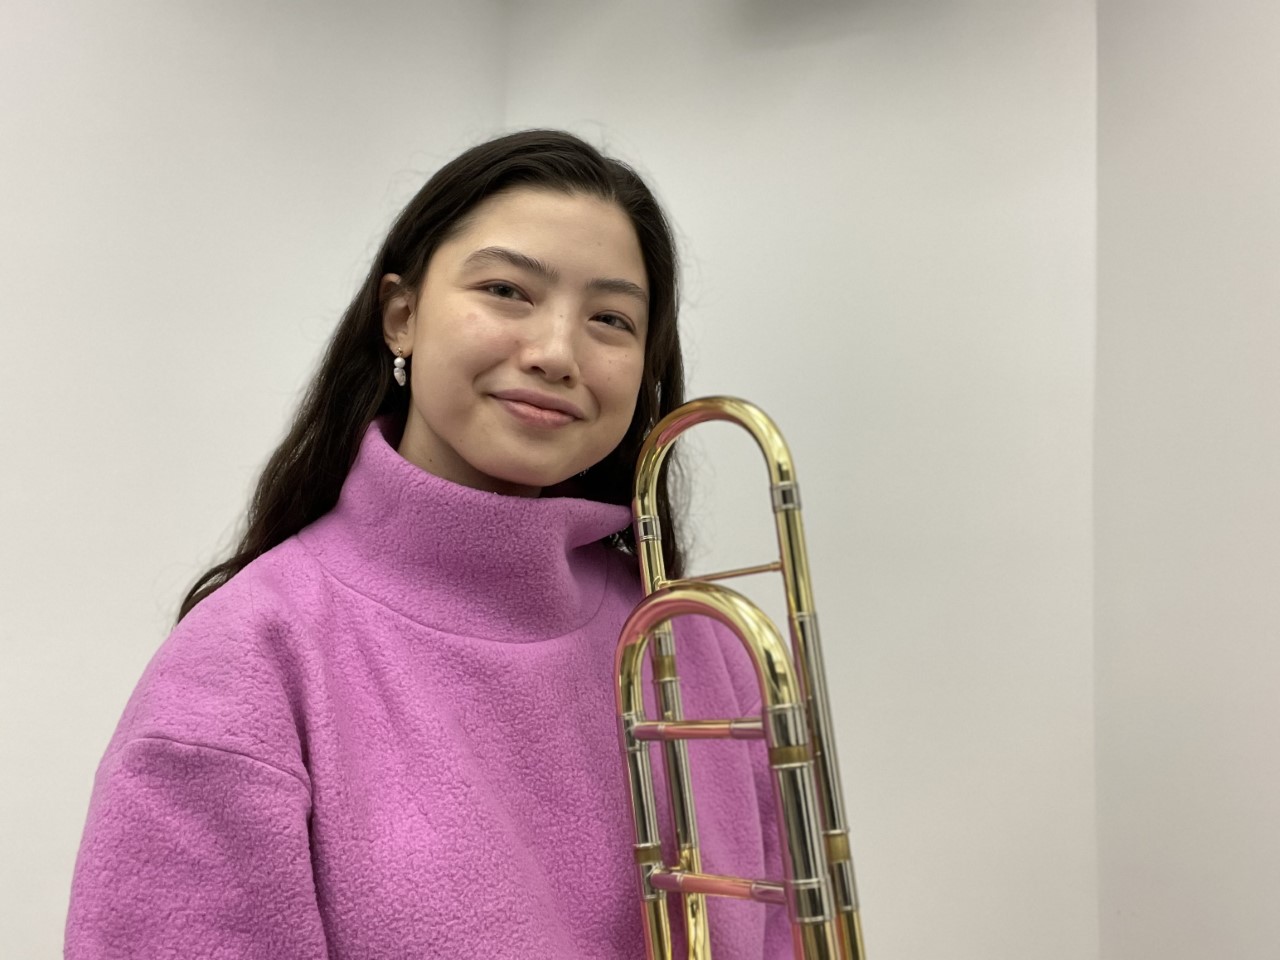 Isabella Lau smiling with her trombone.